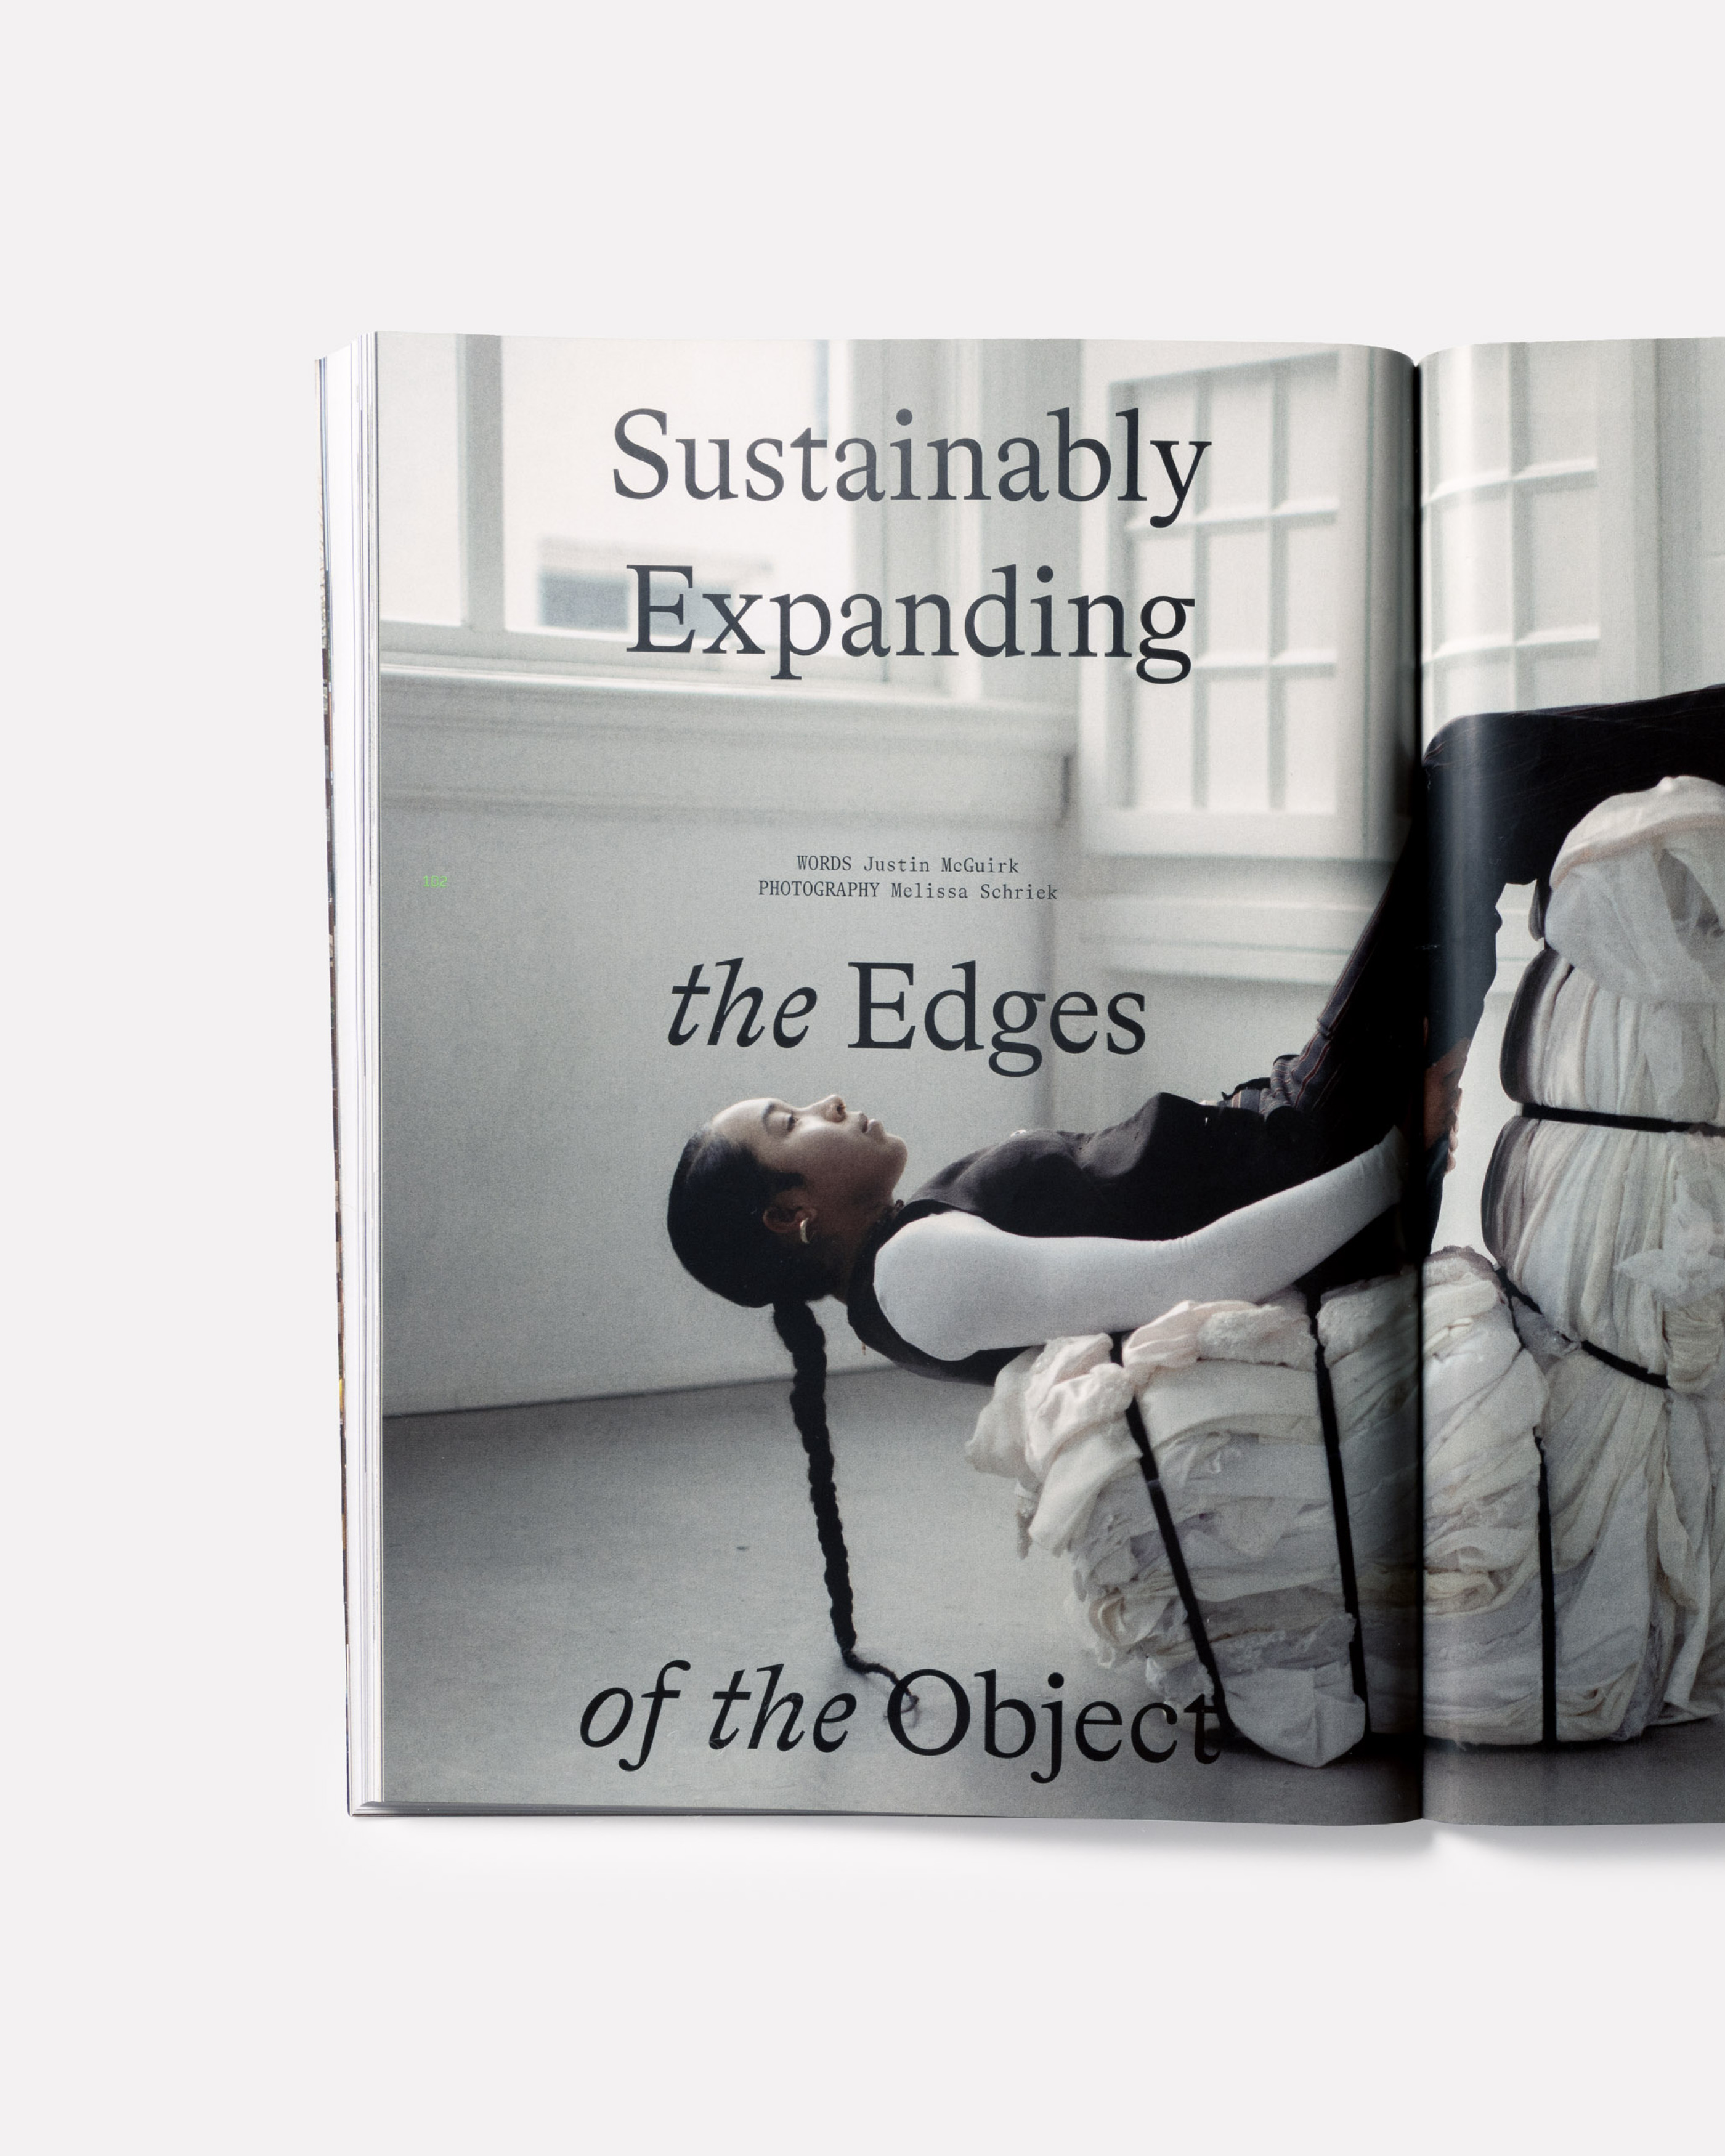 Inside spread of Anima magazine featuring the headline ‘Sustainably Expanding the Edges of the Object’ on white background.